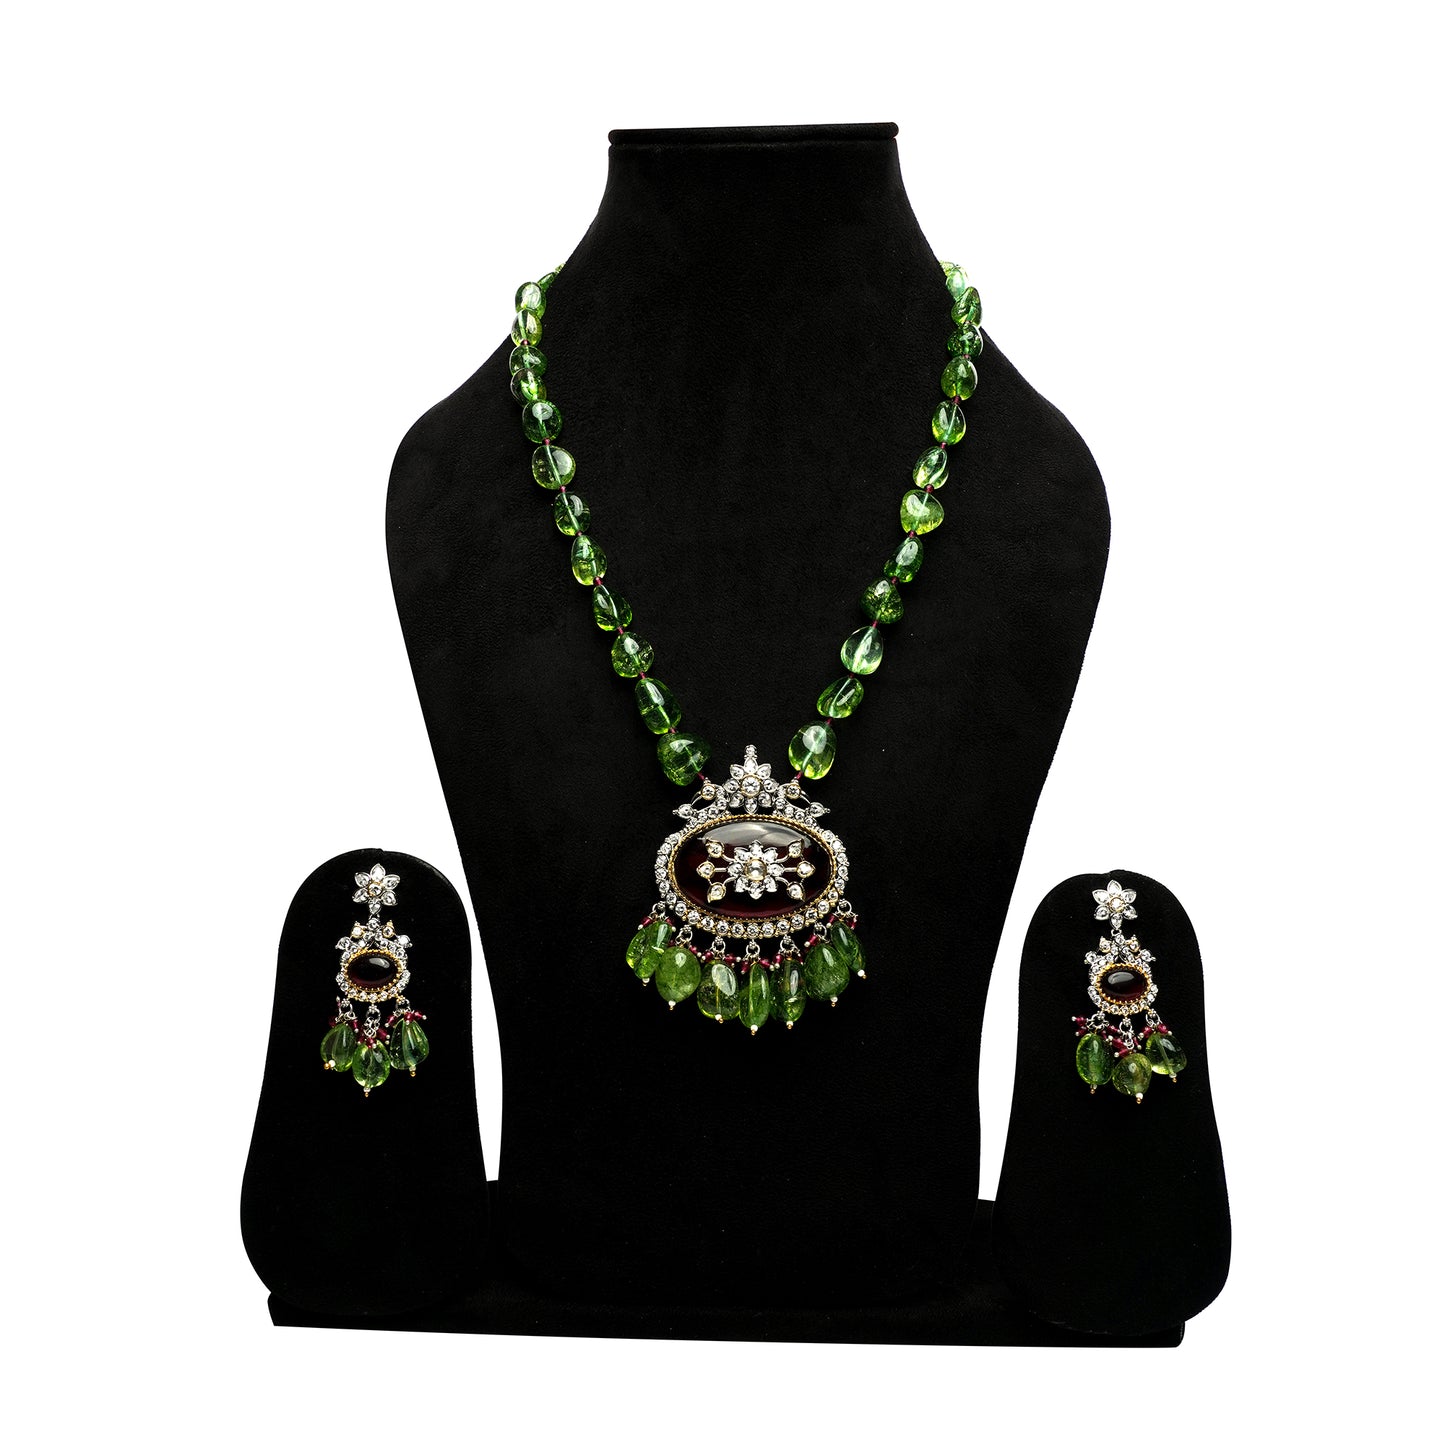 Necklace with green beads